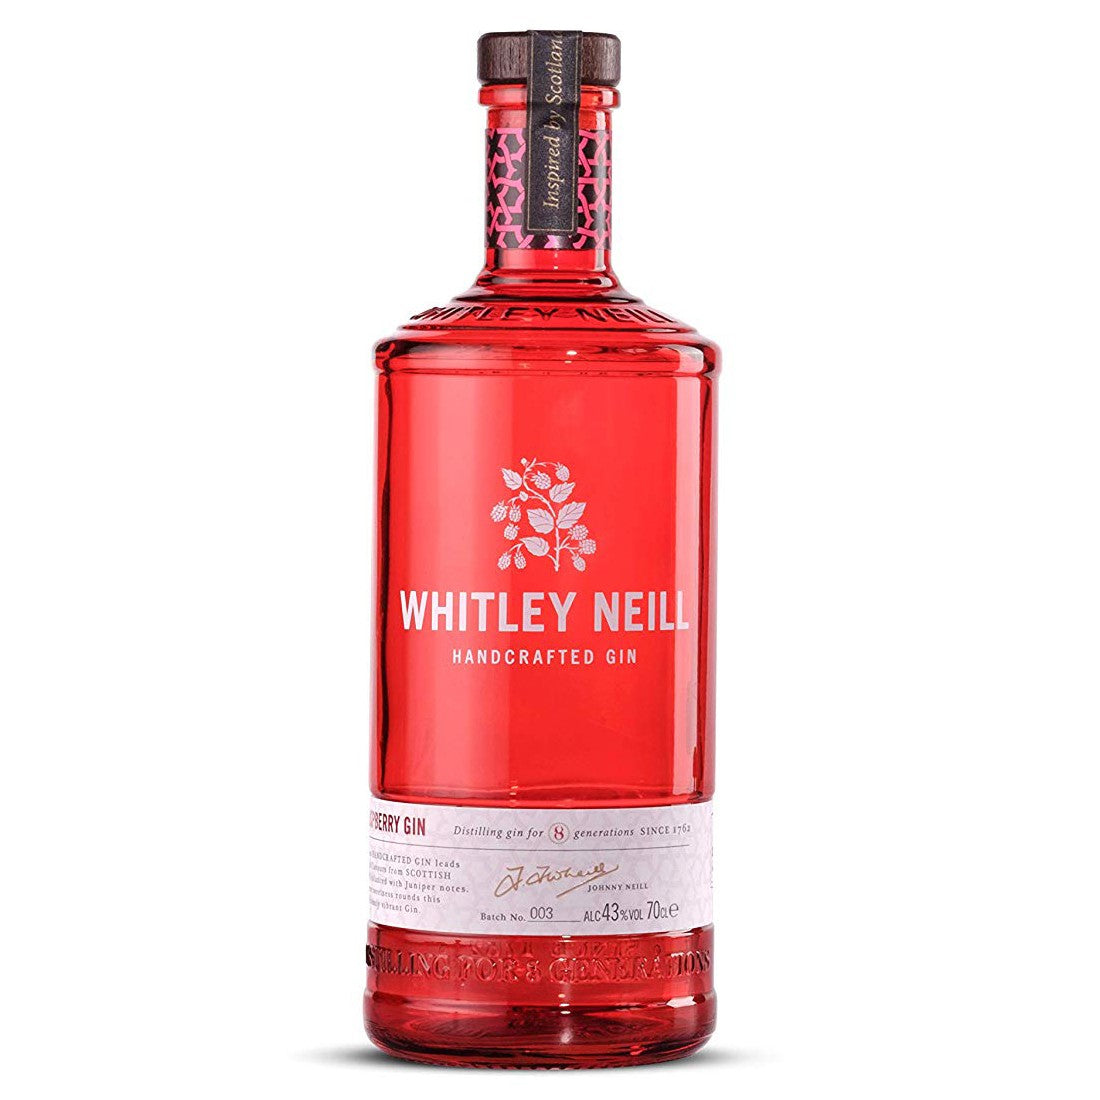 Whitley Neill Handcrafted Raspberry Gin